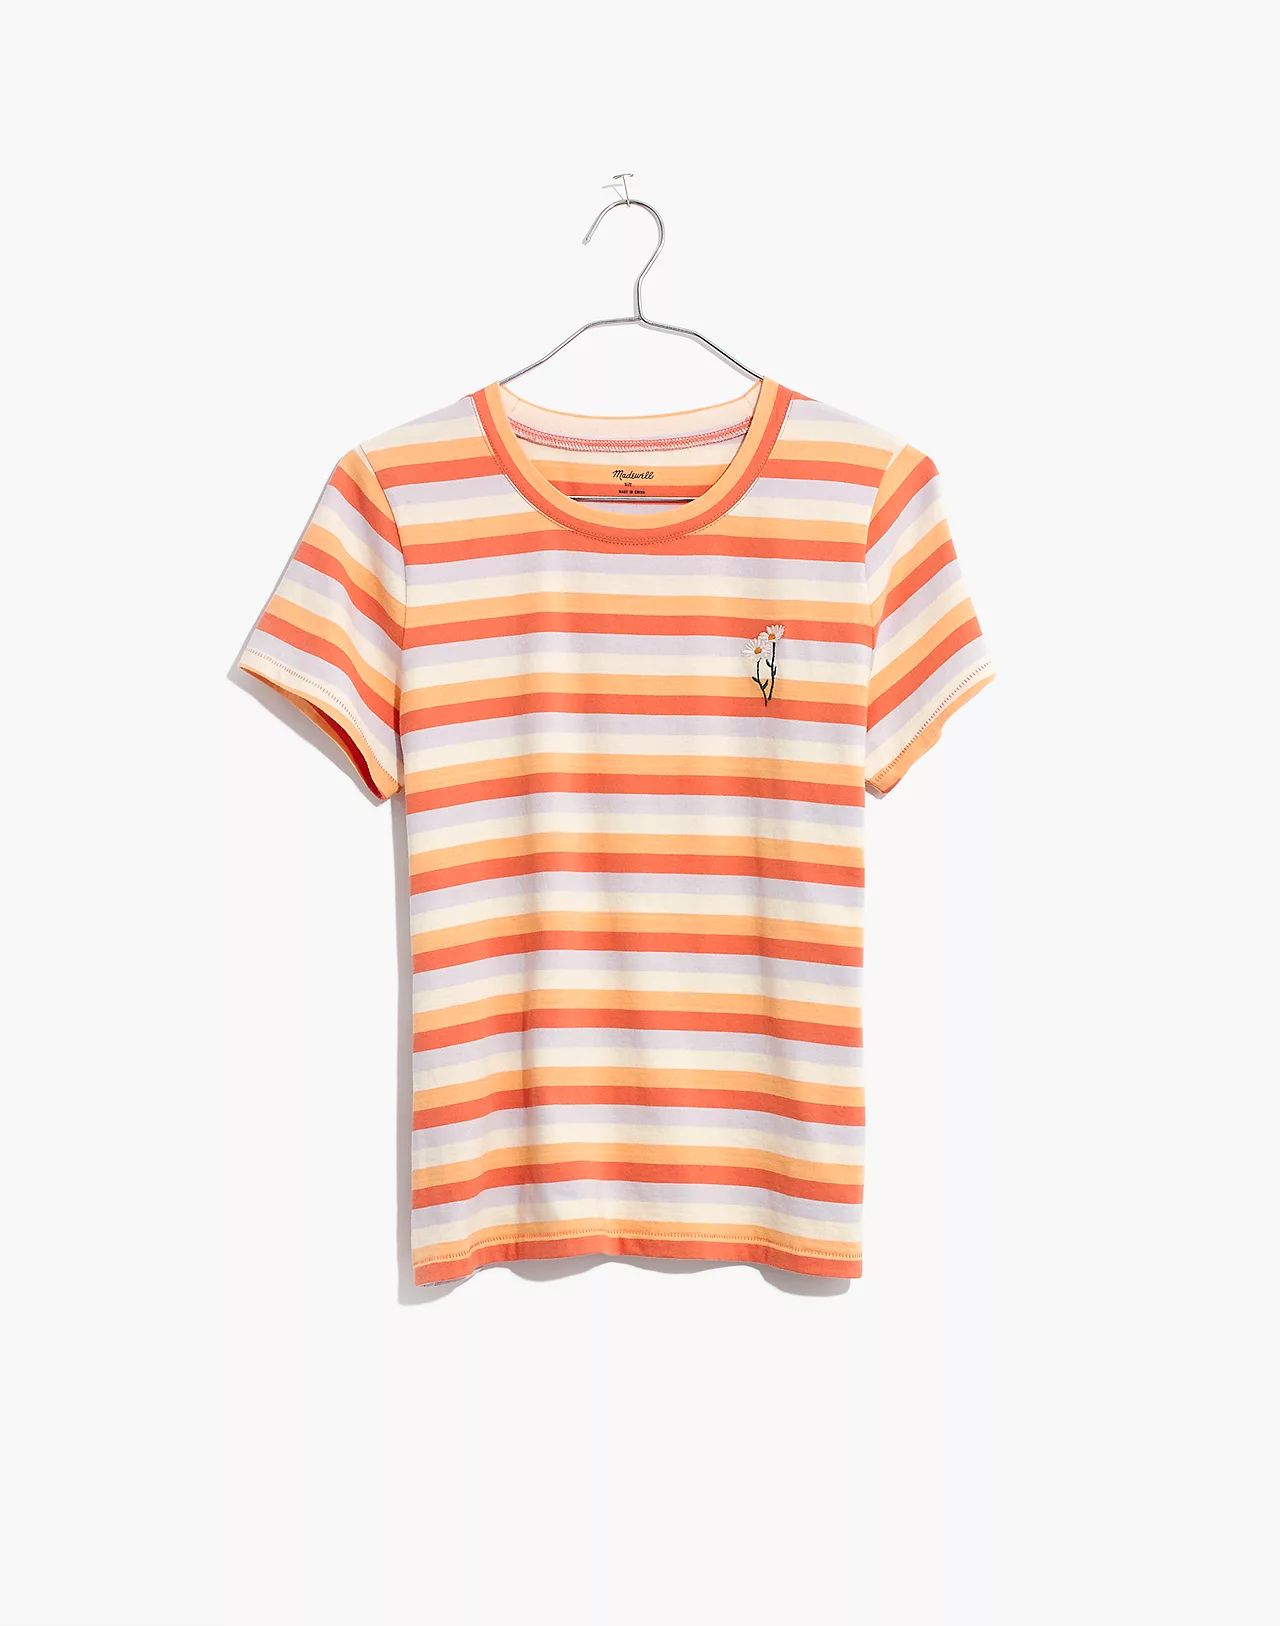 Daisy Embroidered Northside Vintage Tee in Broadway Stripe | Madewell